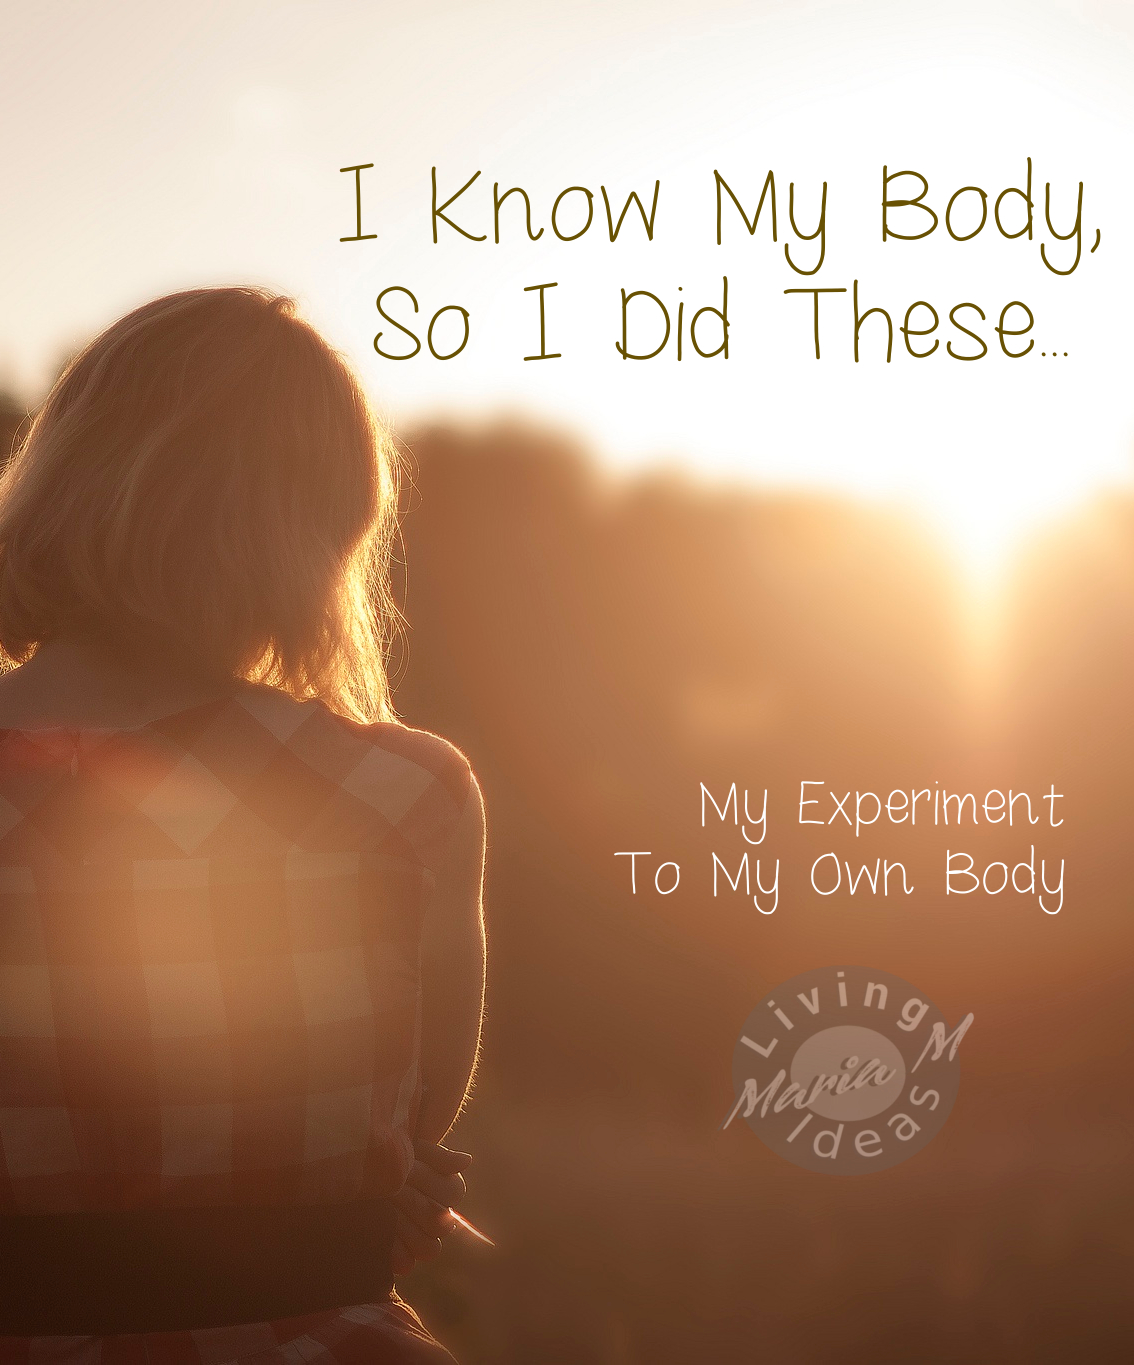 I know my body so i did this, read here about experiment that I did to my own body